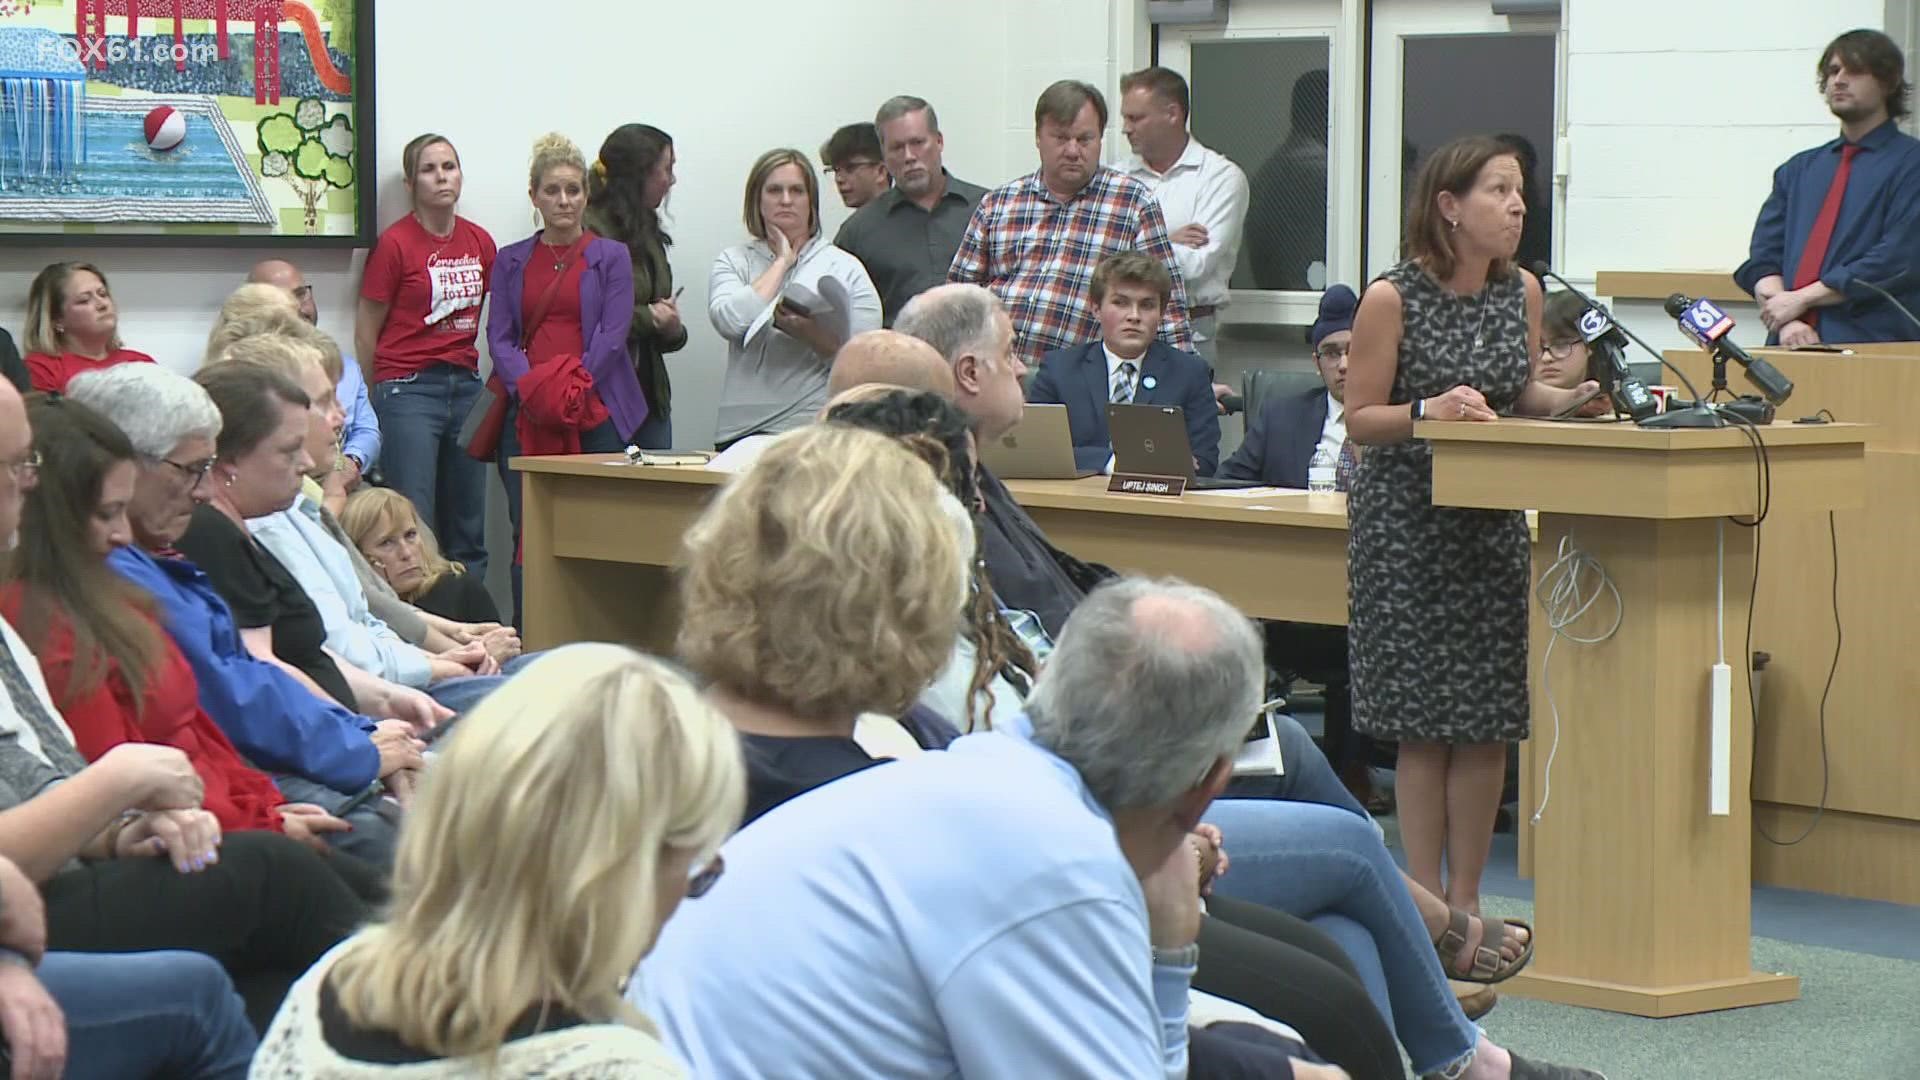 Parents gathered at a board meeting disagreeing with what is being taught outside of the curriculum